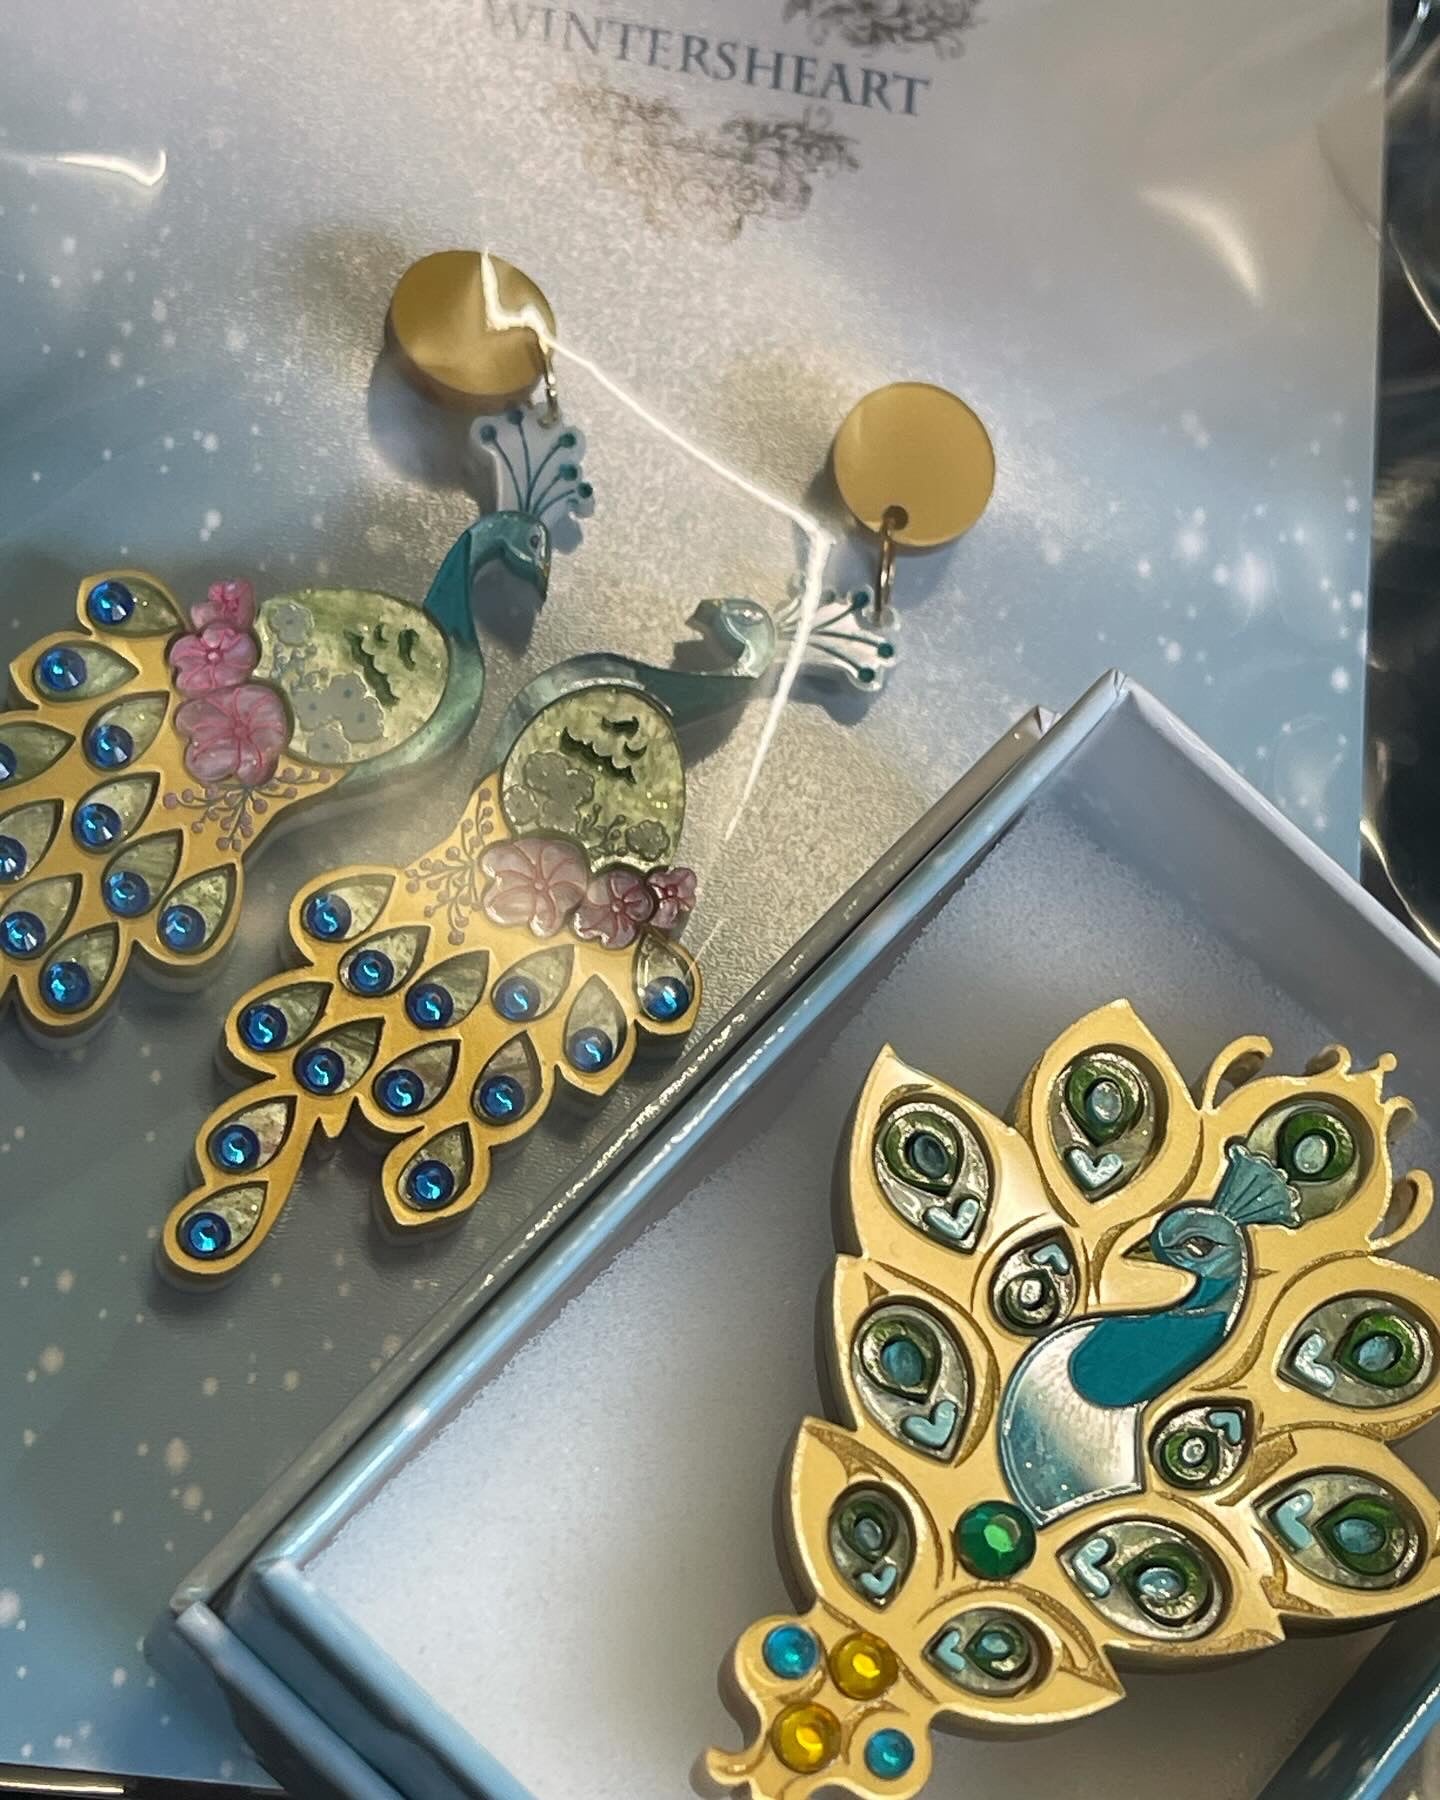 Gold Peacock Brooch and Earrings set by Wintersheart Whimsy